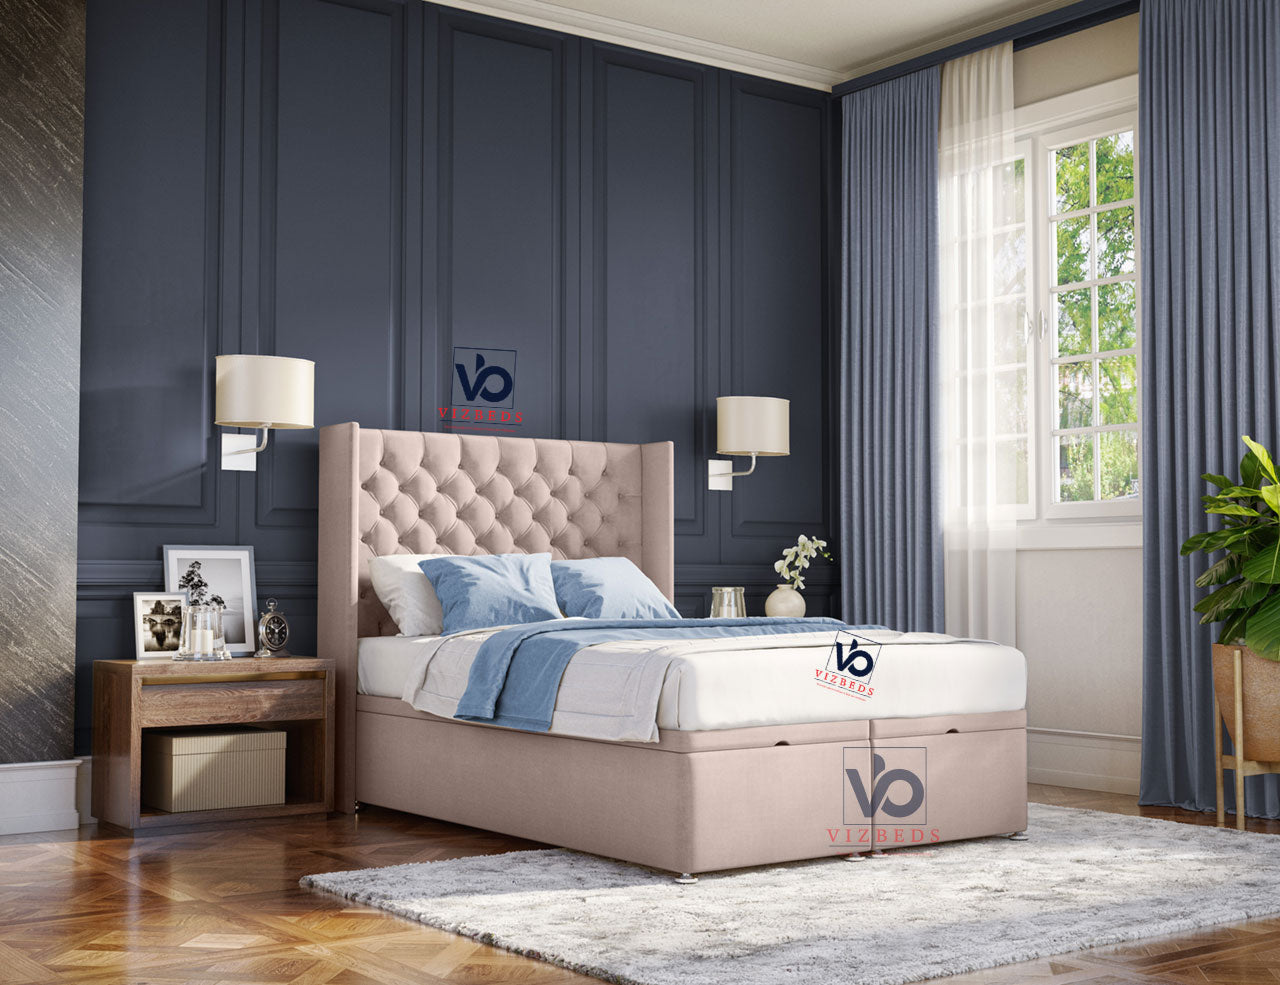 014 Chesterfield Winged Storage Ottoman Bed + Free 54" Luxury Winged Headboard